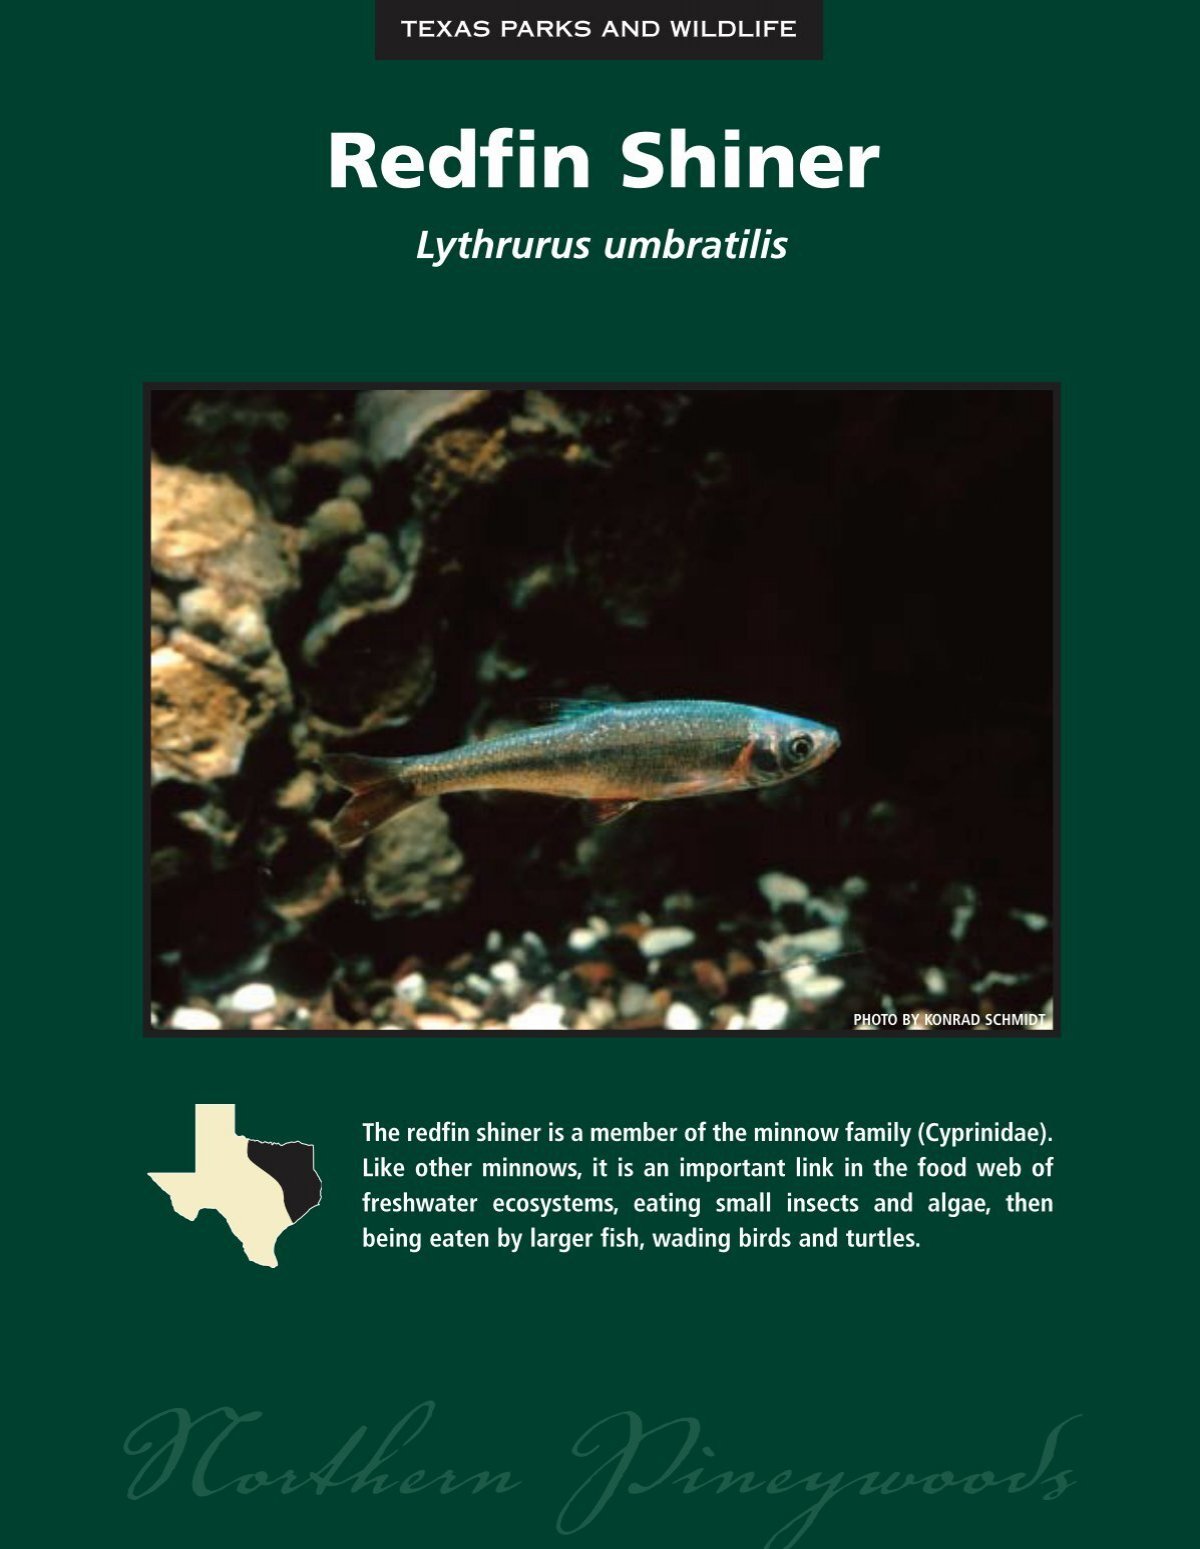 Redfin Shiner - The State of Water